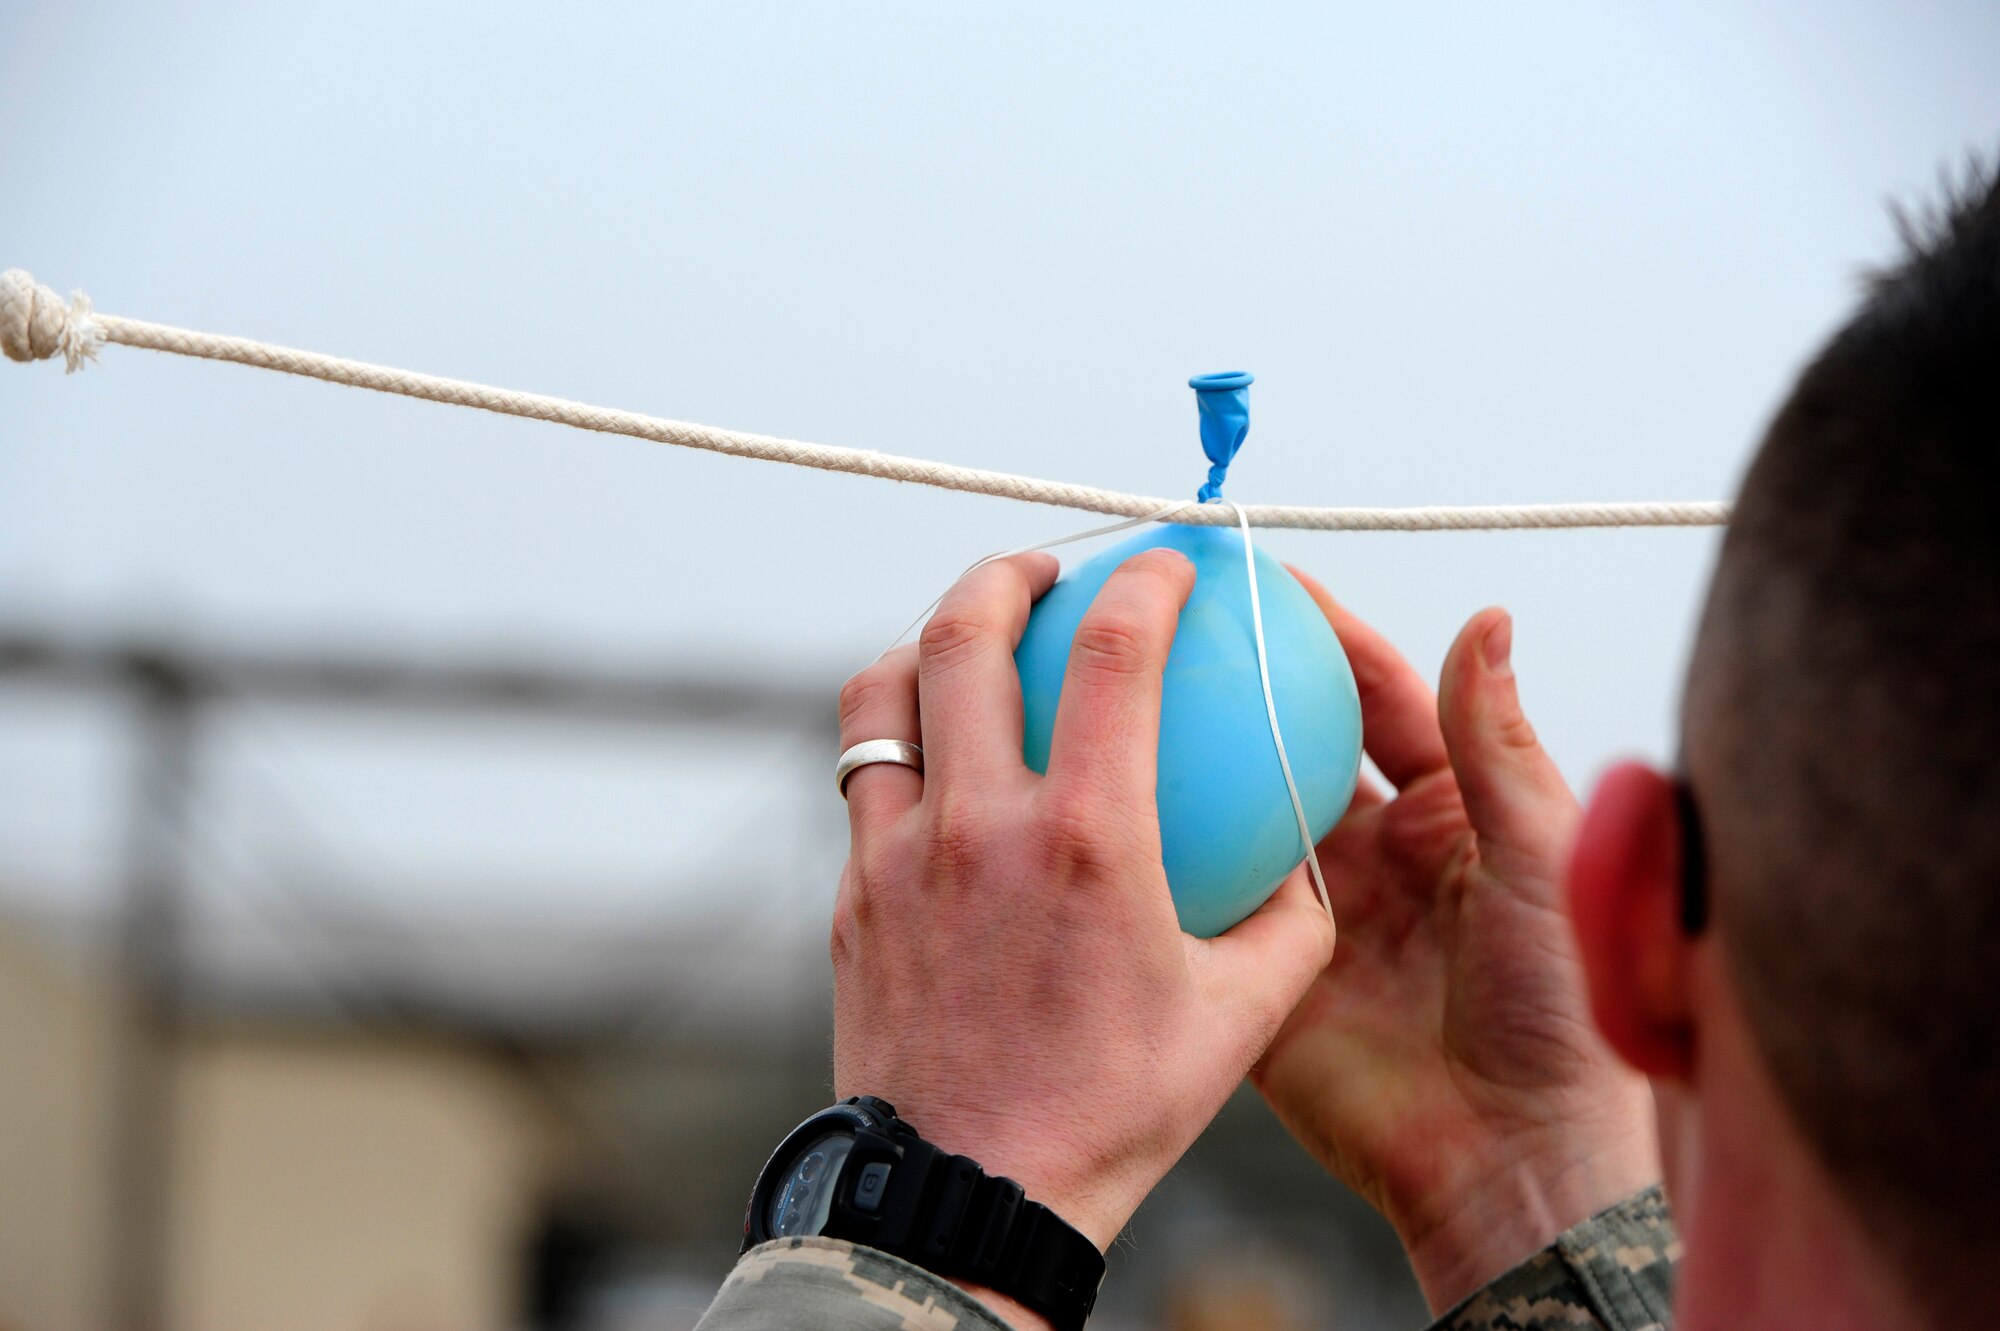 A balloon is tied on a string before the start of a jammer driving contest during a first quarter load crew of the quarter competition at Kunsan Air Base, Republic of Korea, April 8, 2016. During this contest, two jammer drivers from different units battled it out head-to-head, maneuvering their way around cones towards two balloon station. The first driver to pop the balloon and return to his parking spot won the contest. These competitions highlight the high level of proficiency and job knowledge among Airmen in the maintenance community. (U.S. Air Force photo by Staff Sgt. Nick Wilson/Released)

